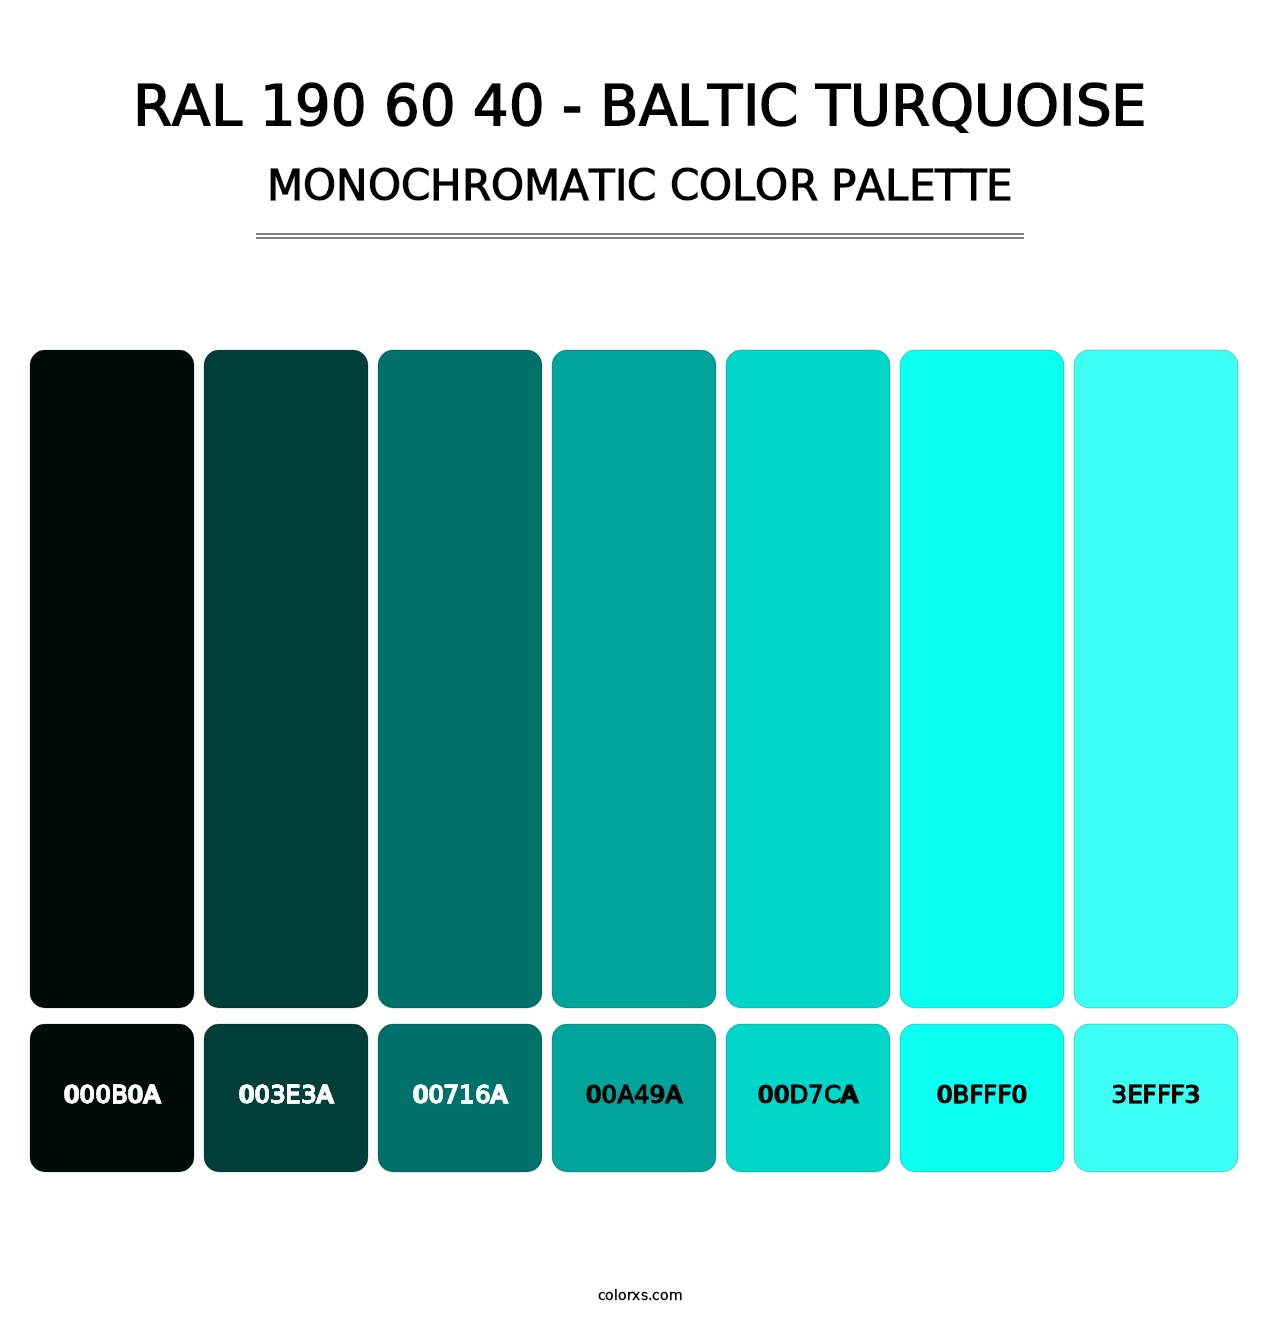 RAL 190 60 40 - Baltic Turquoise - Monochromatic Color Palette